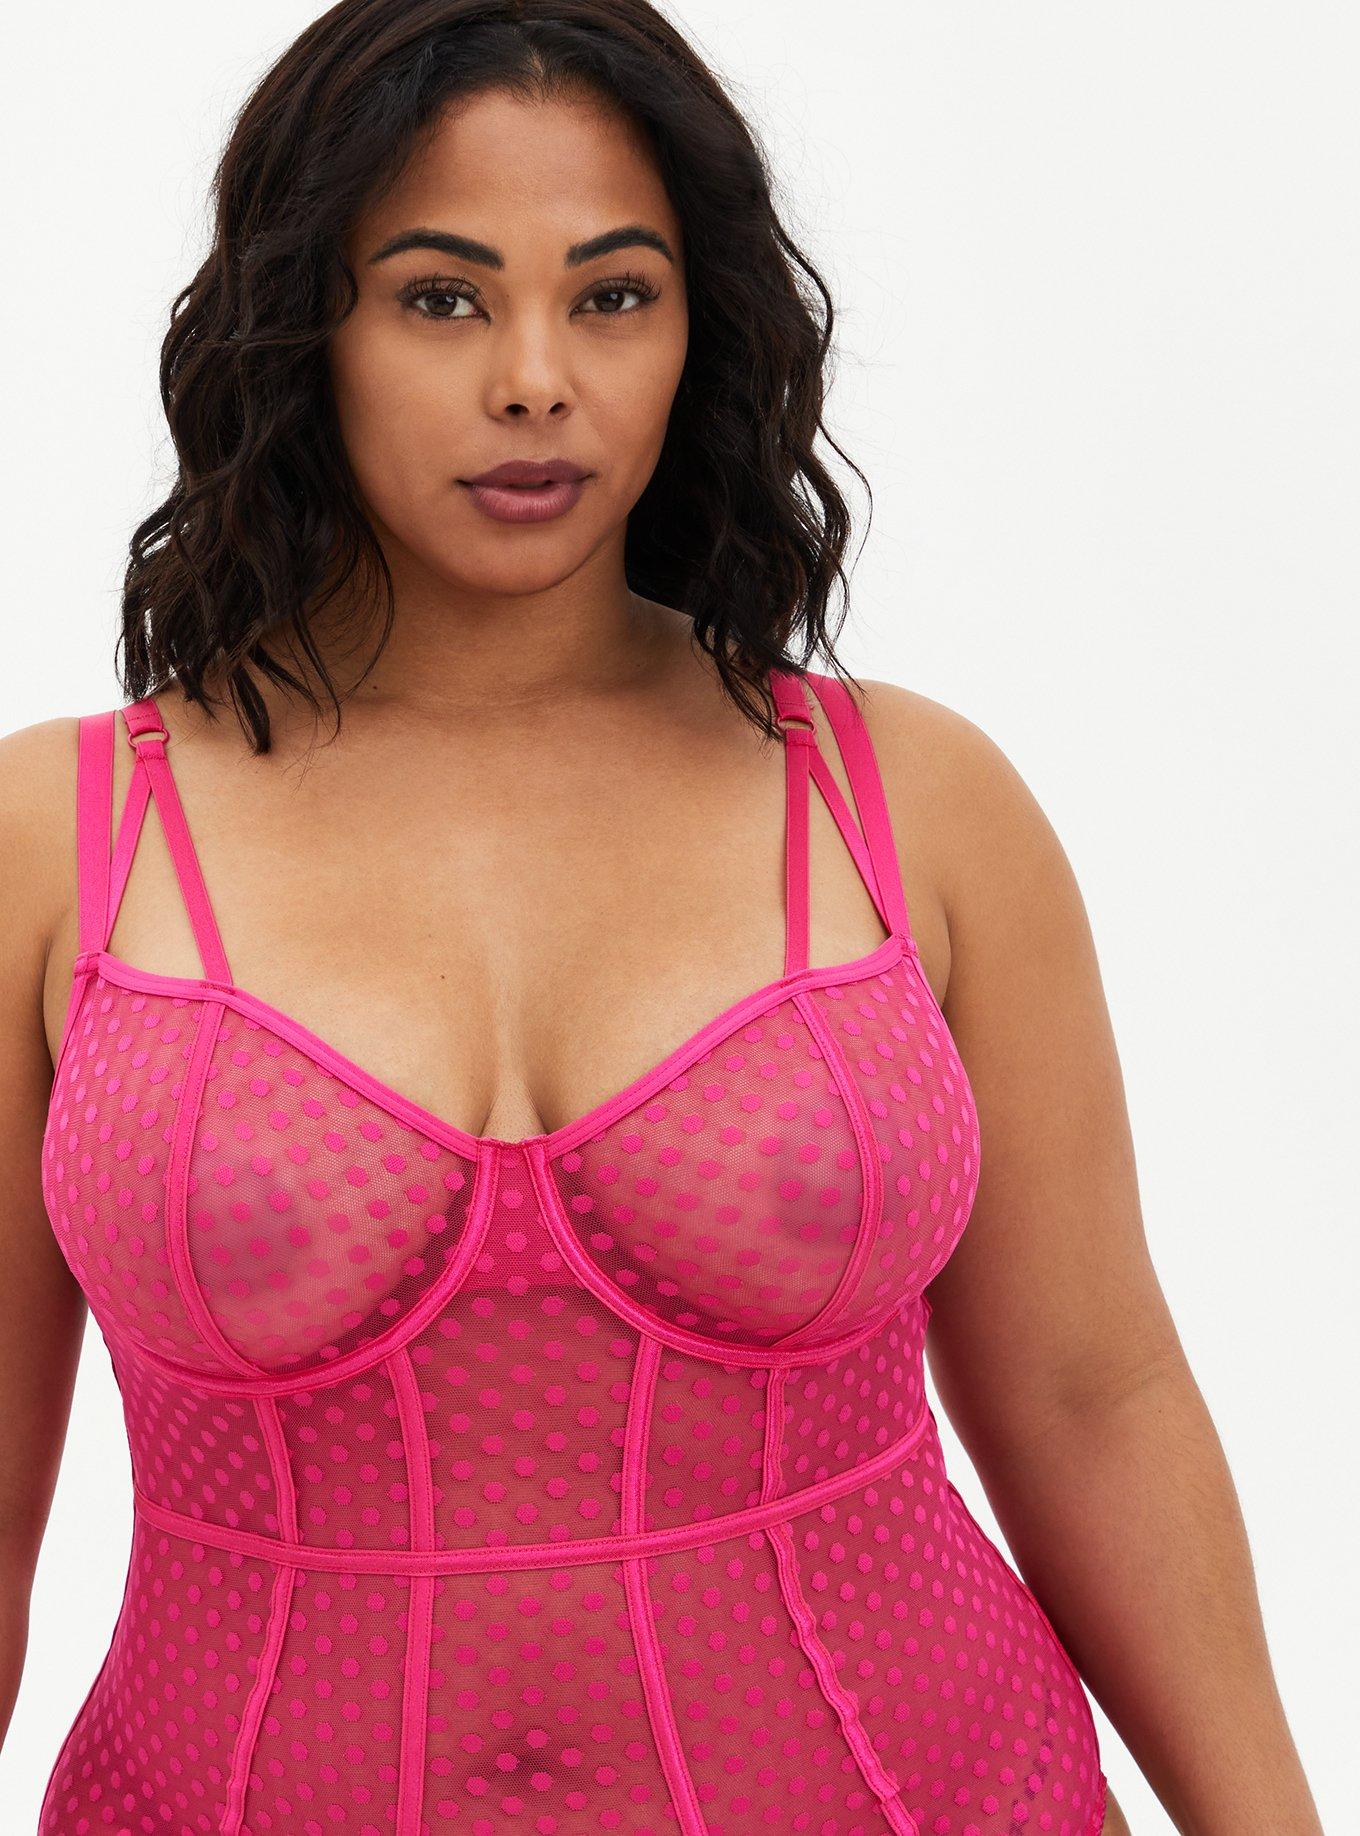 TORRID 46 D BERRY PINK LACE 360 BACK SMOOTHING LIGHTLY LINED FULL COVERAGE  BALCO